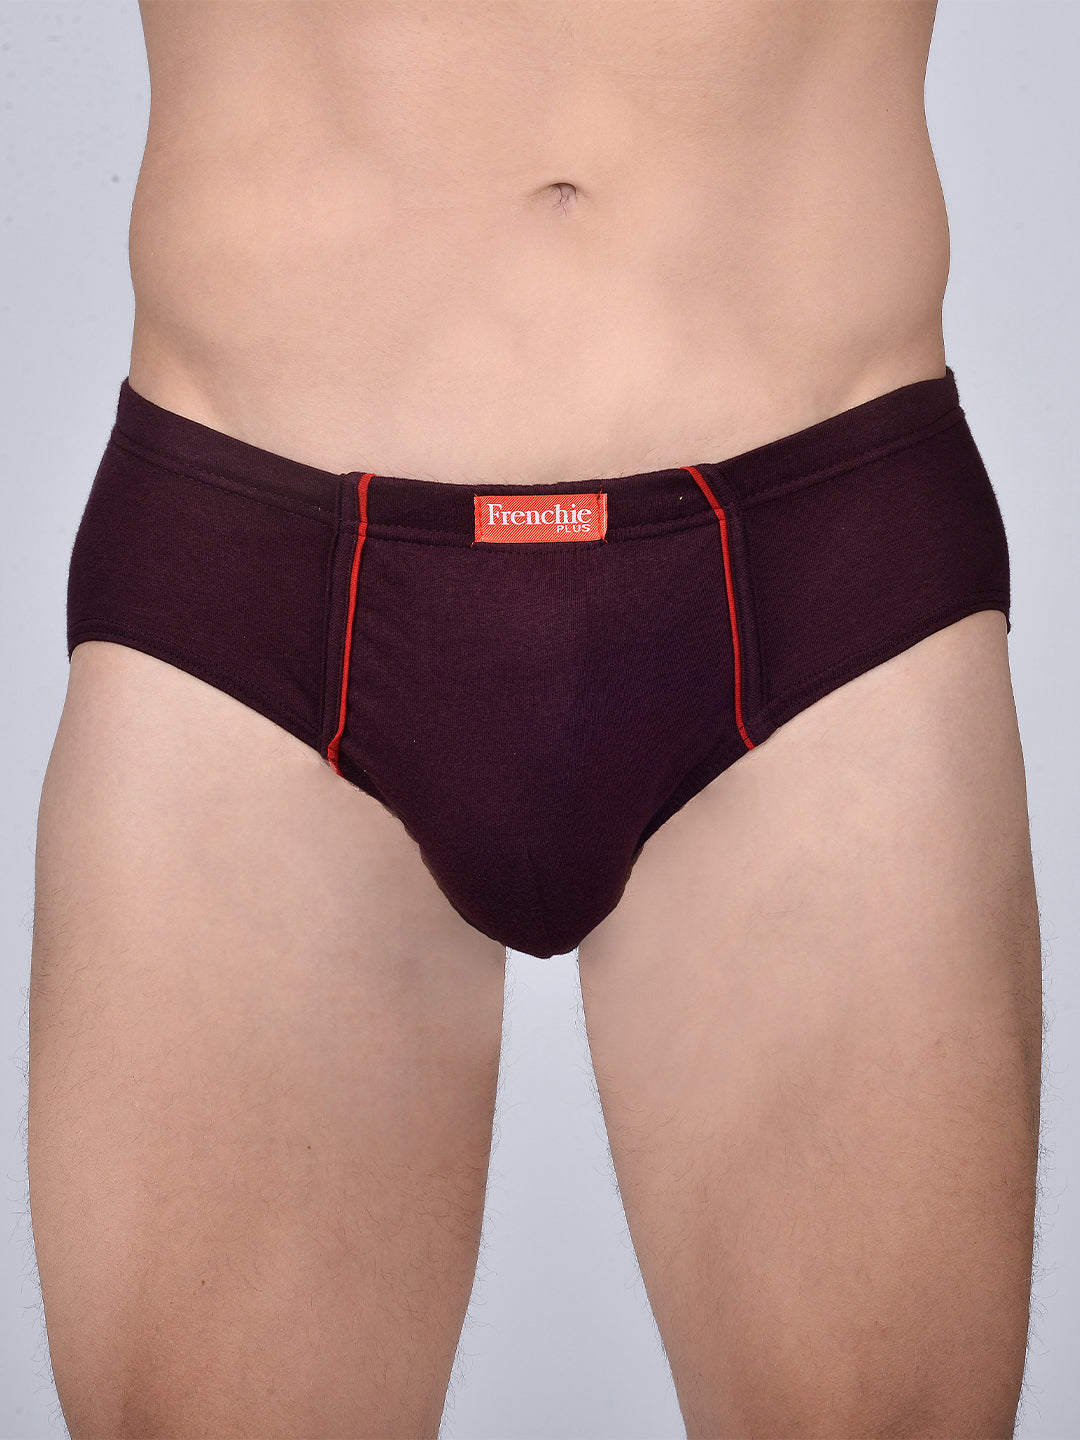 Buy Frenchie Men's Cotton Briefs (Pack of 5) (Envy_Color May